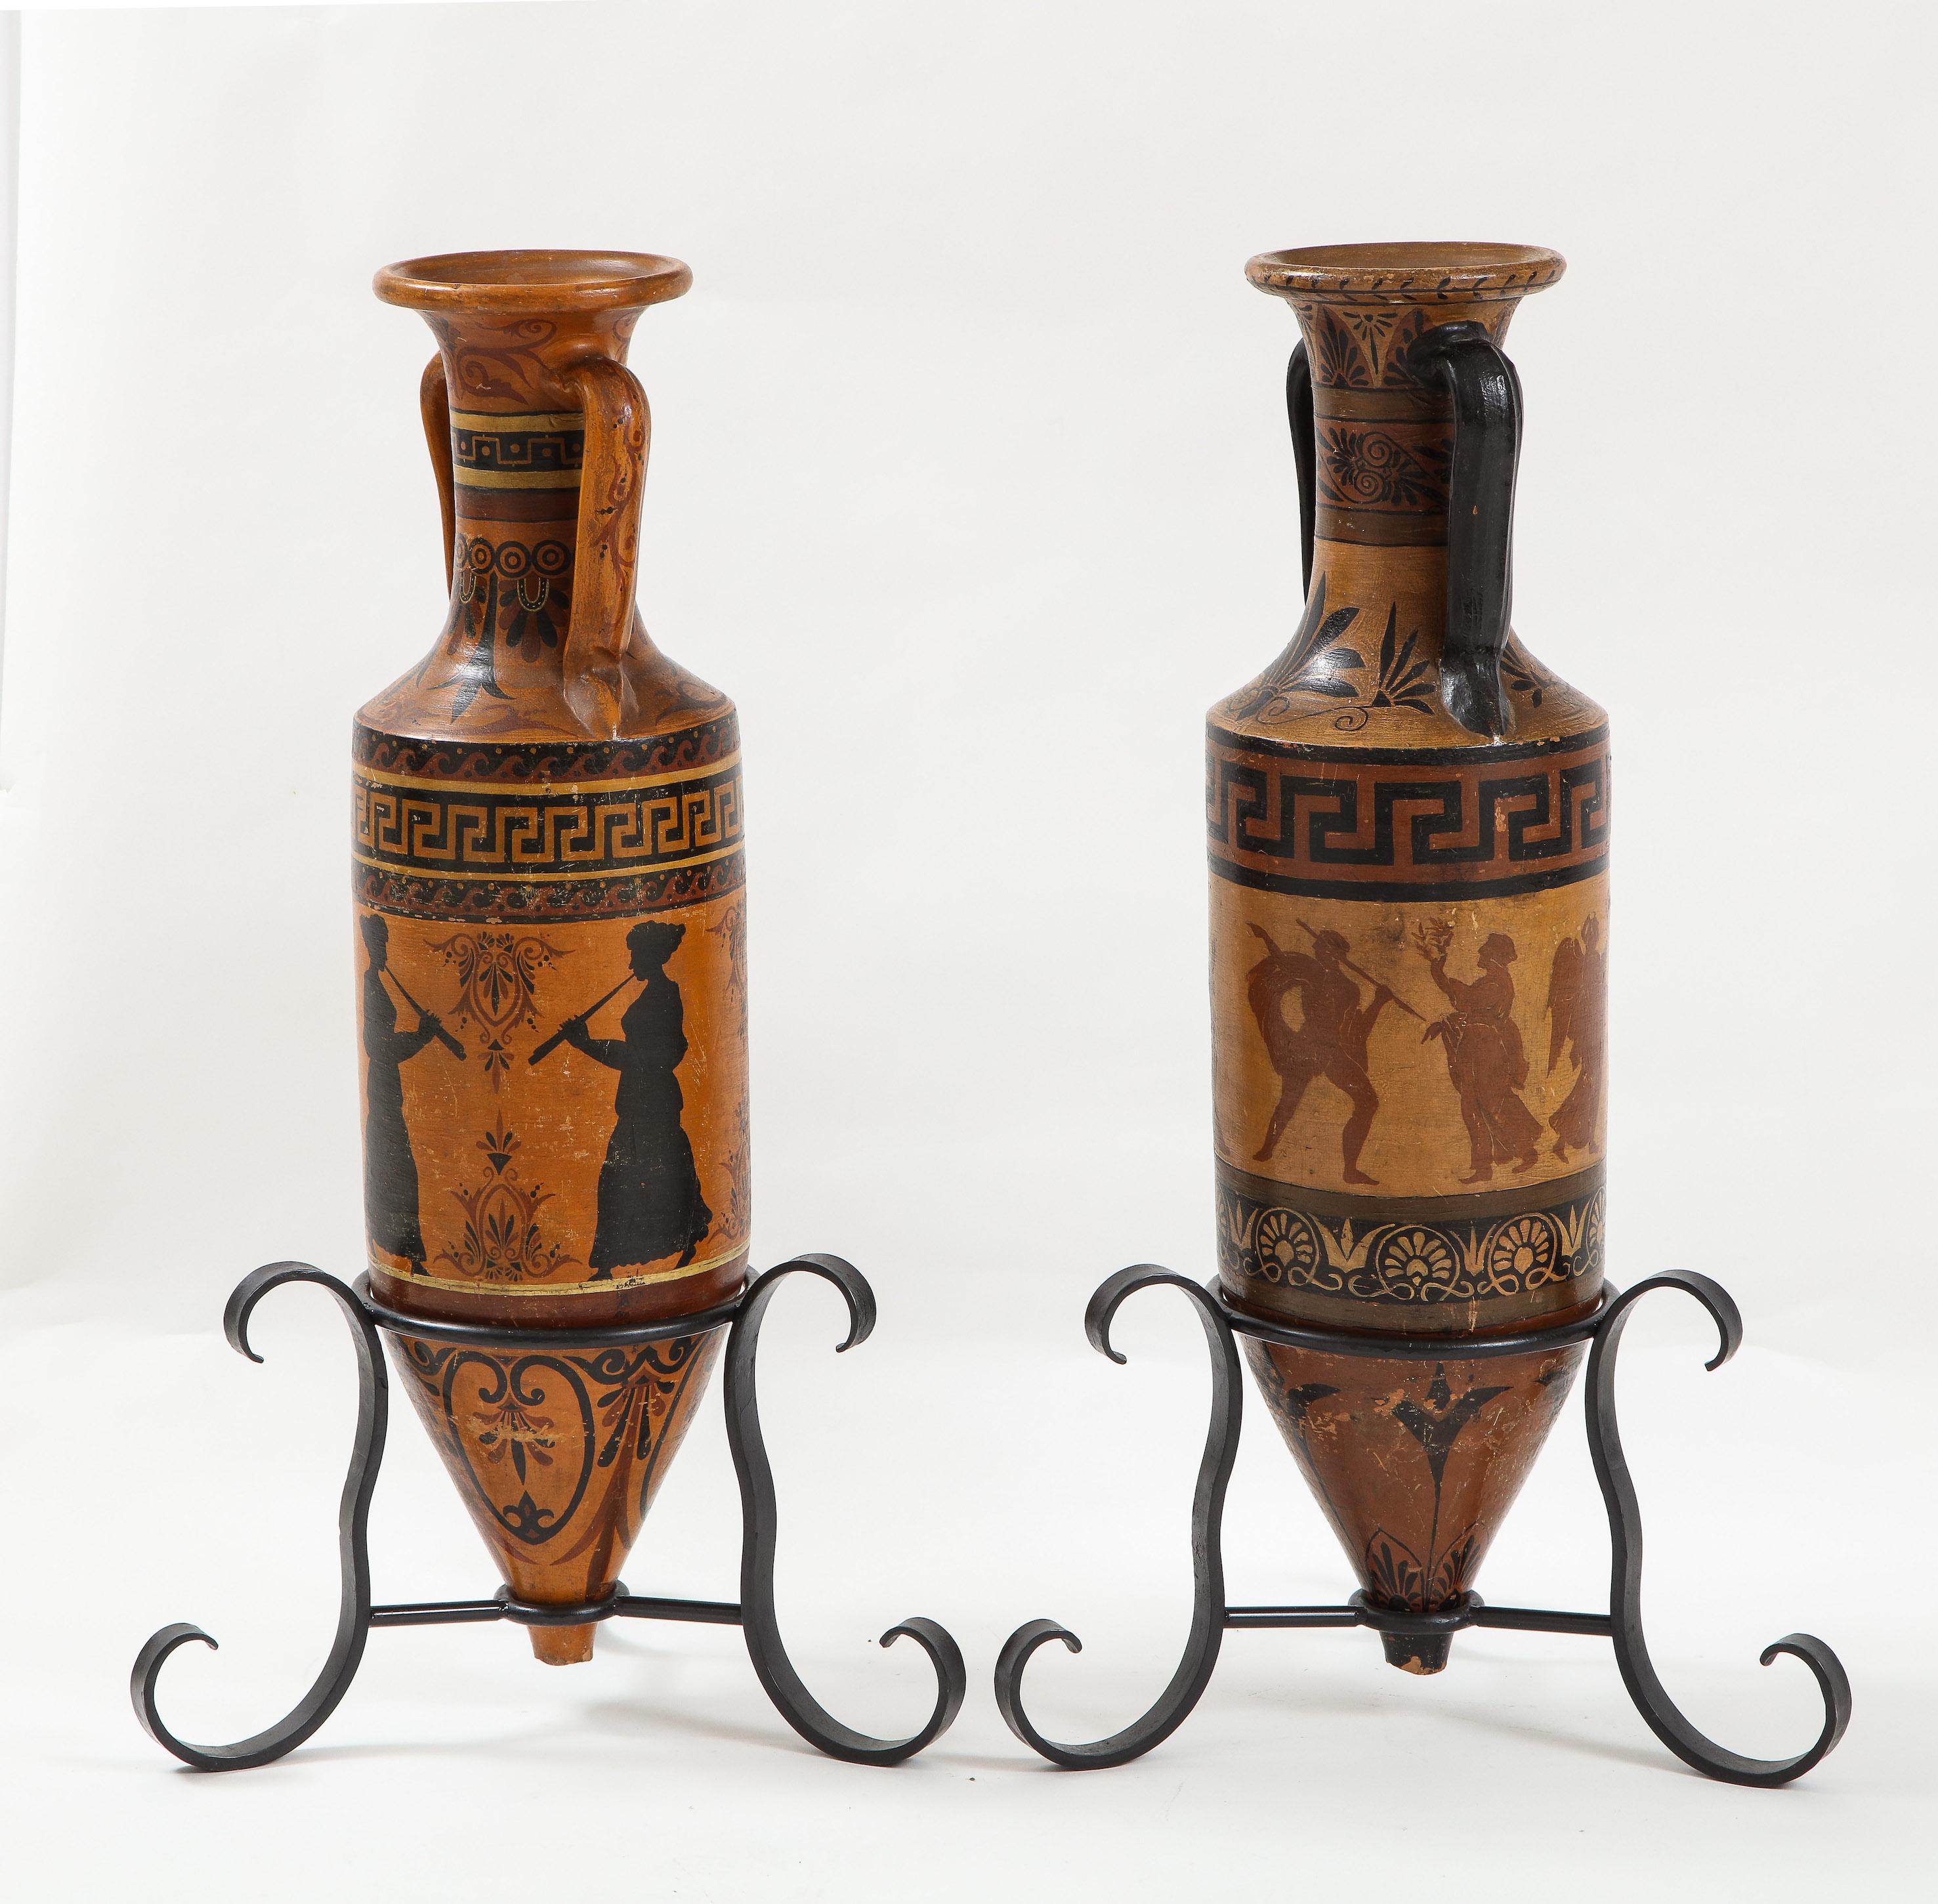 Pair of Italian ceramic amphora’s in the Etruscan style with painted neoclassical figures. Set on later iron bases.